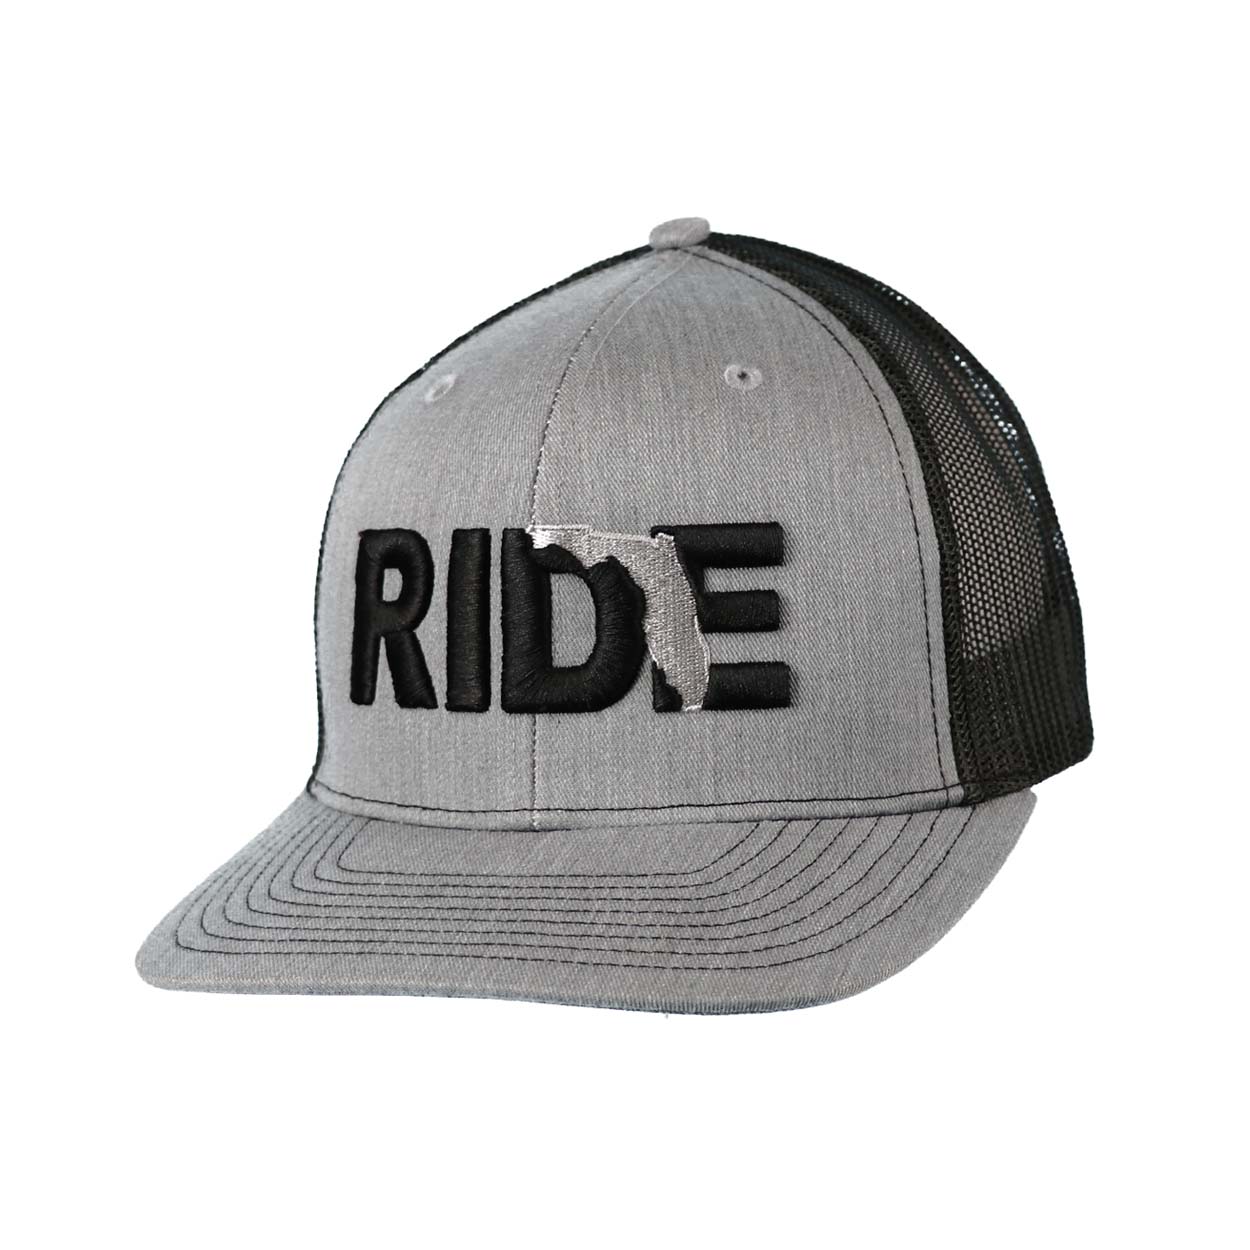 Ride Florida Classic Pro 3D Puff Embroidered Snapback Trucker Hat Heather Gray/Black